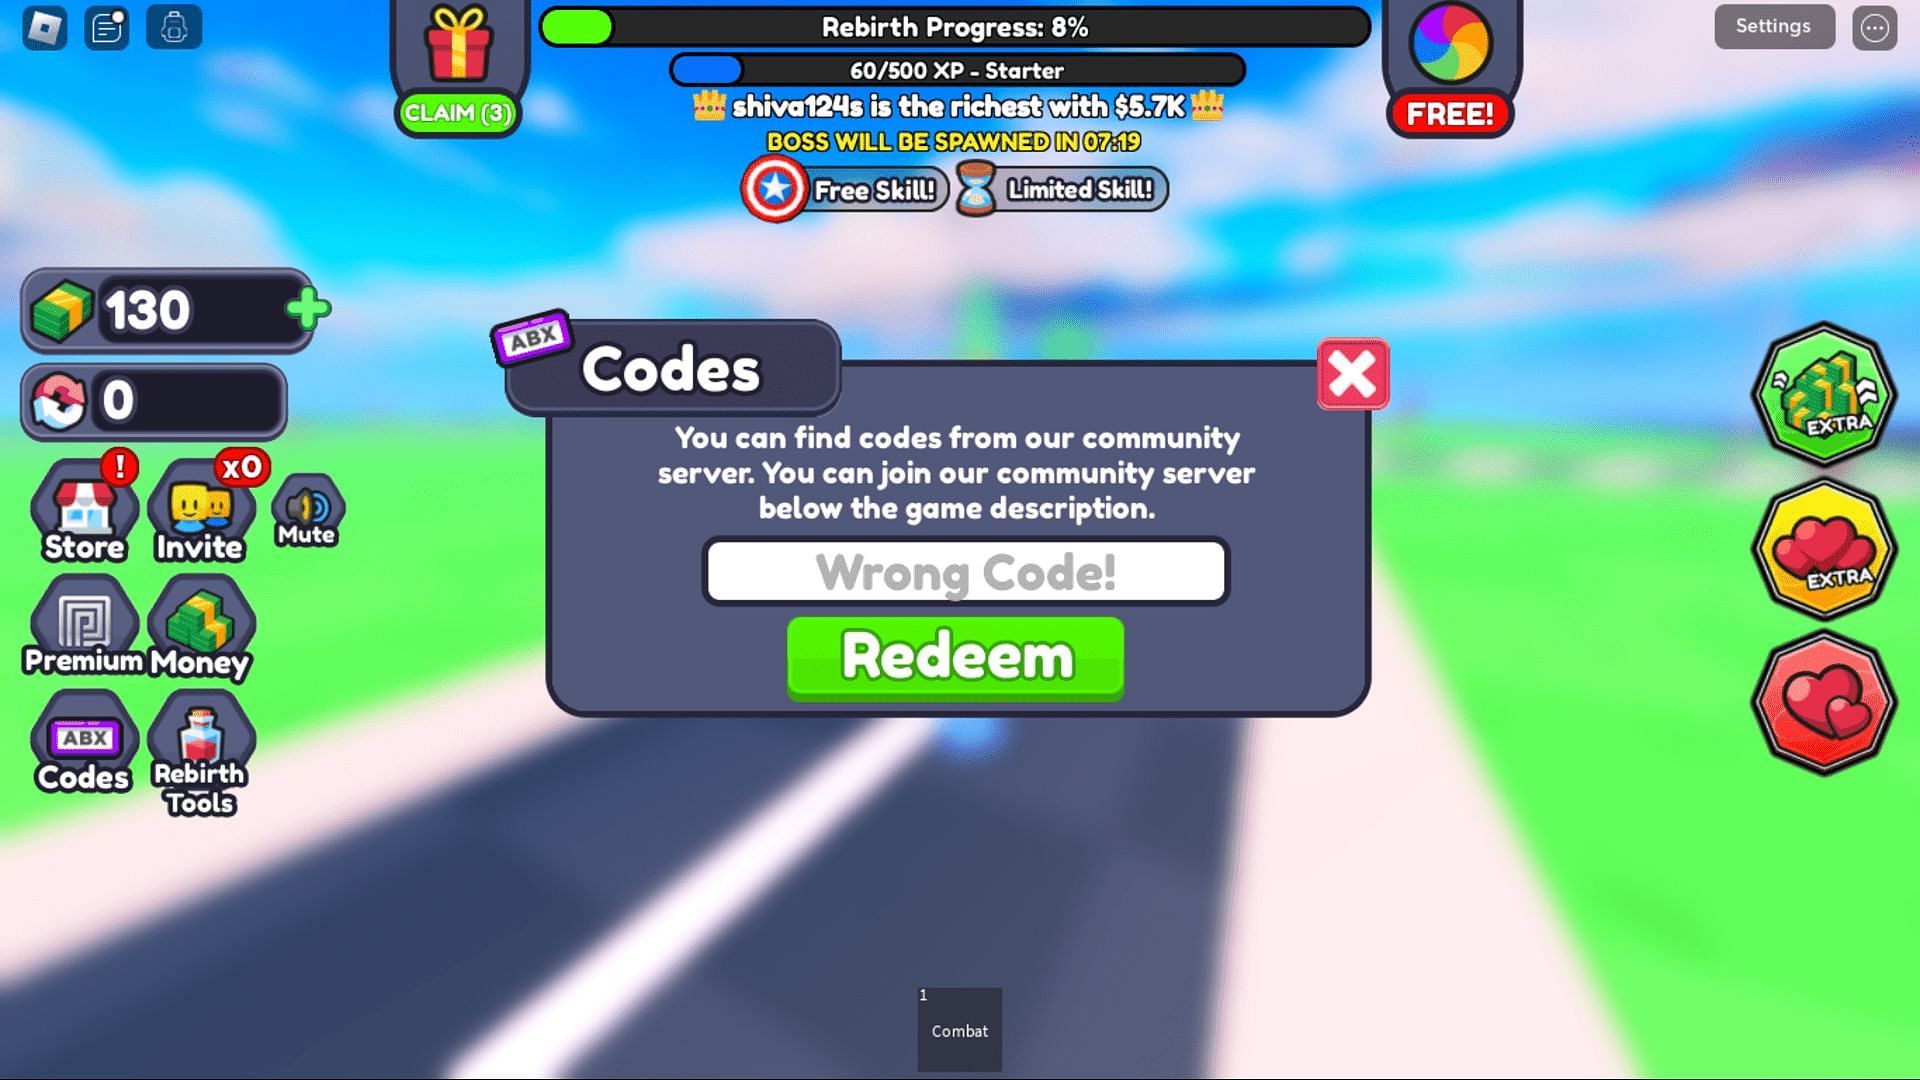 Troubleshoot codes in Hero Power Tycoon with ease (Image via Roblox)